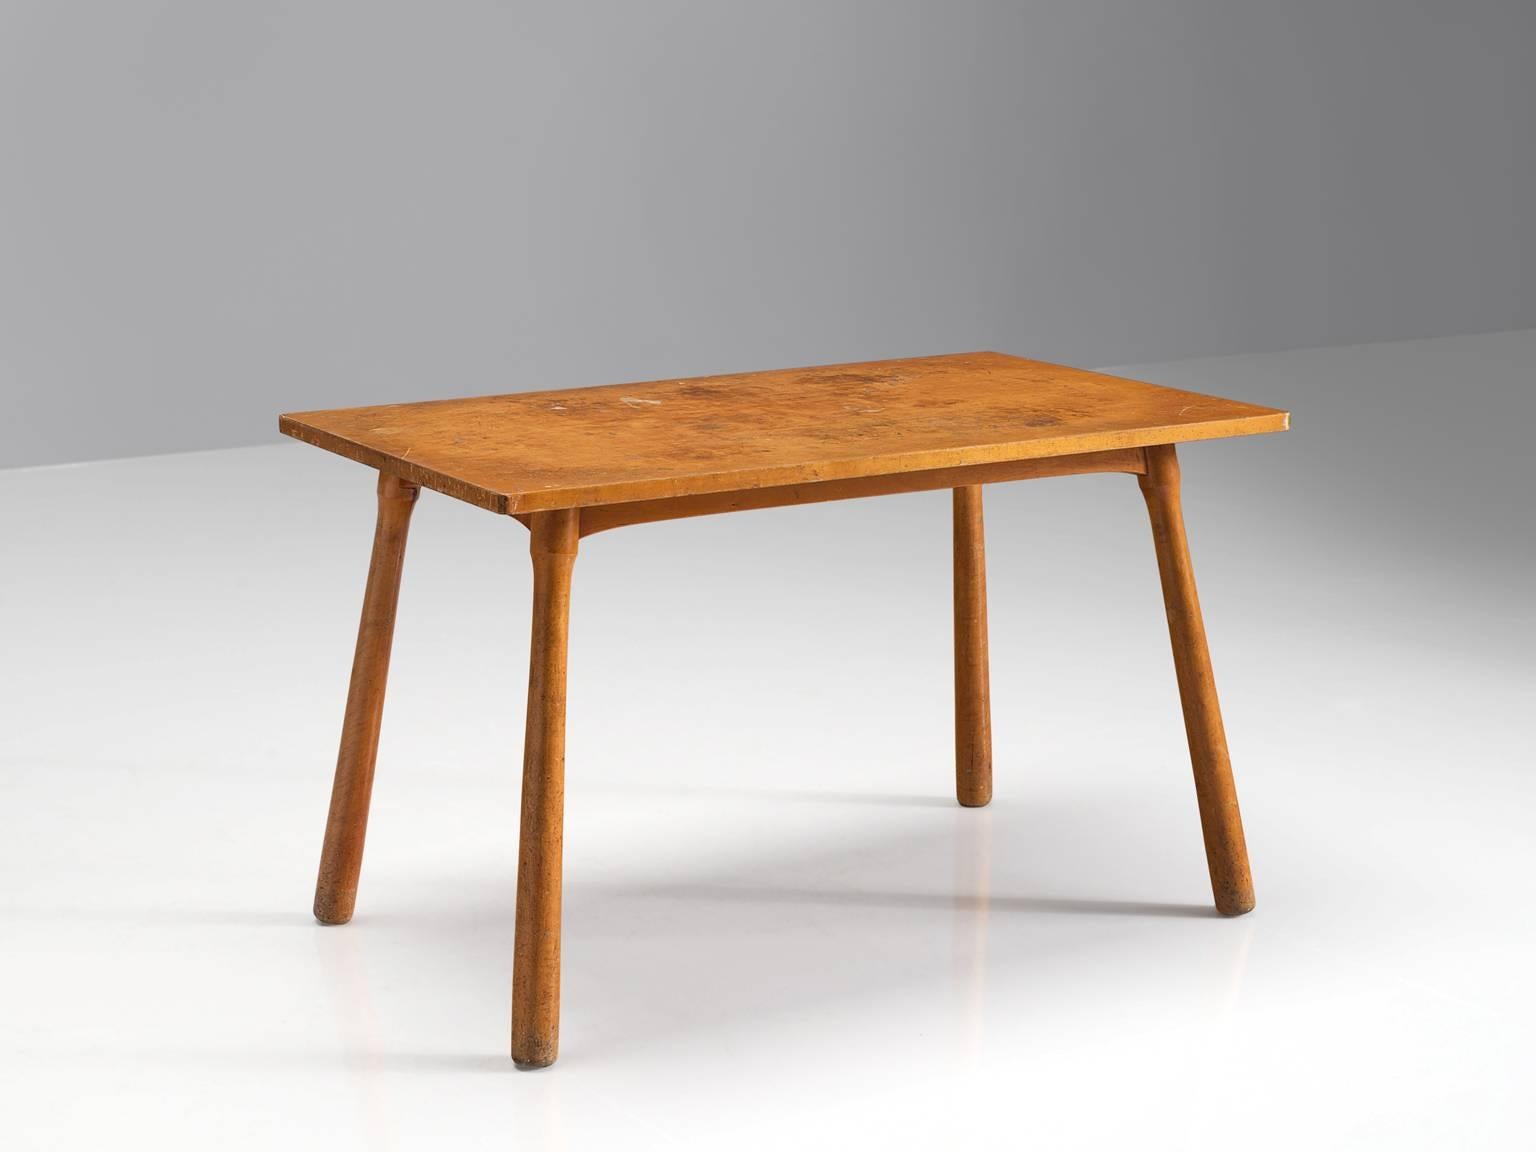 Coffee table, beech, Denmark, 1960

This modest coffee table has a simple, effective design. The top features a patinated beech rectangle. The legs are cylindrical and tapered and solid. The effect of a round solid shape of the legs with the slim